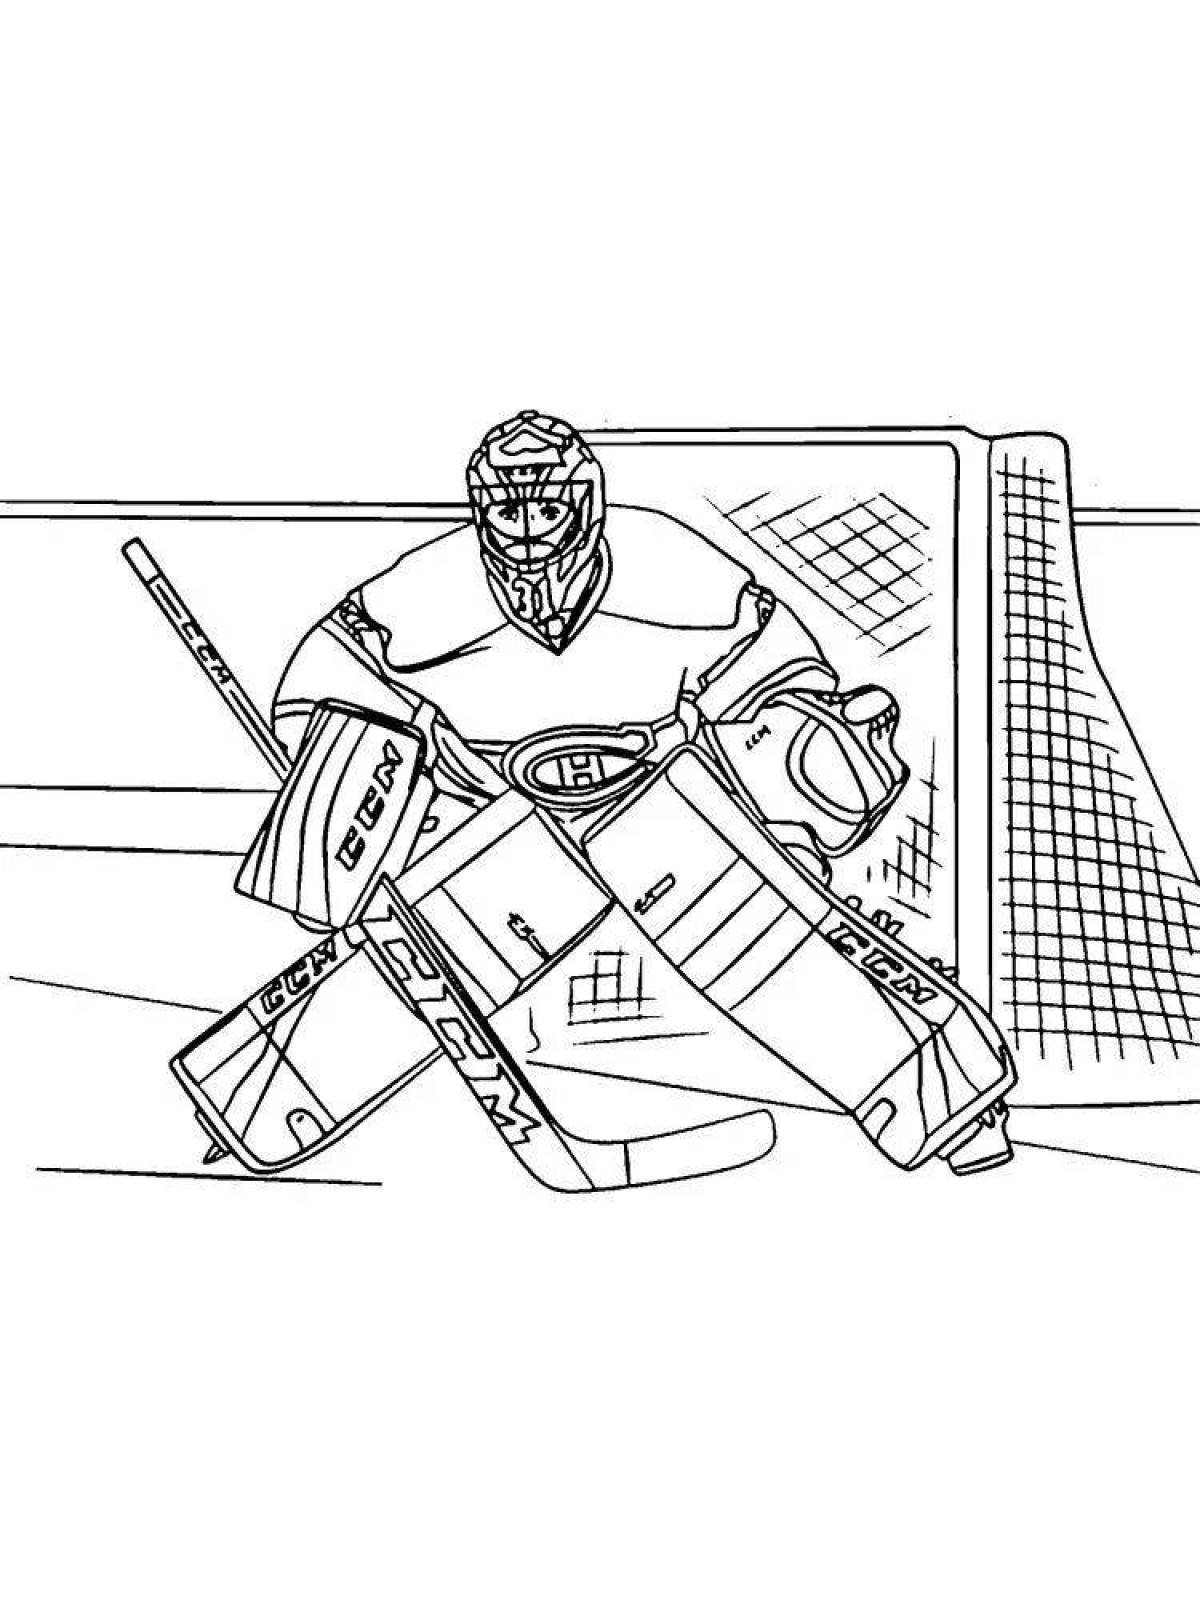 Coloring page graceful goalkeeper